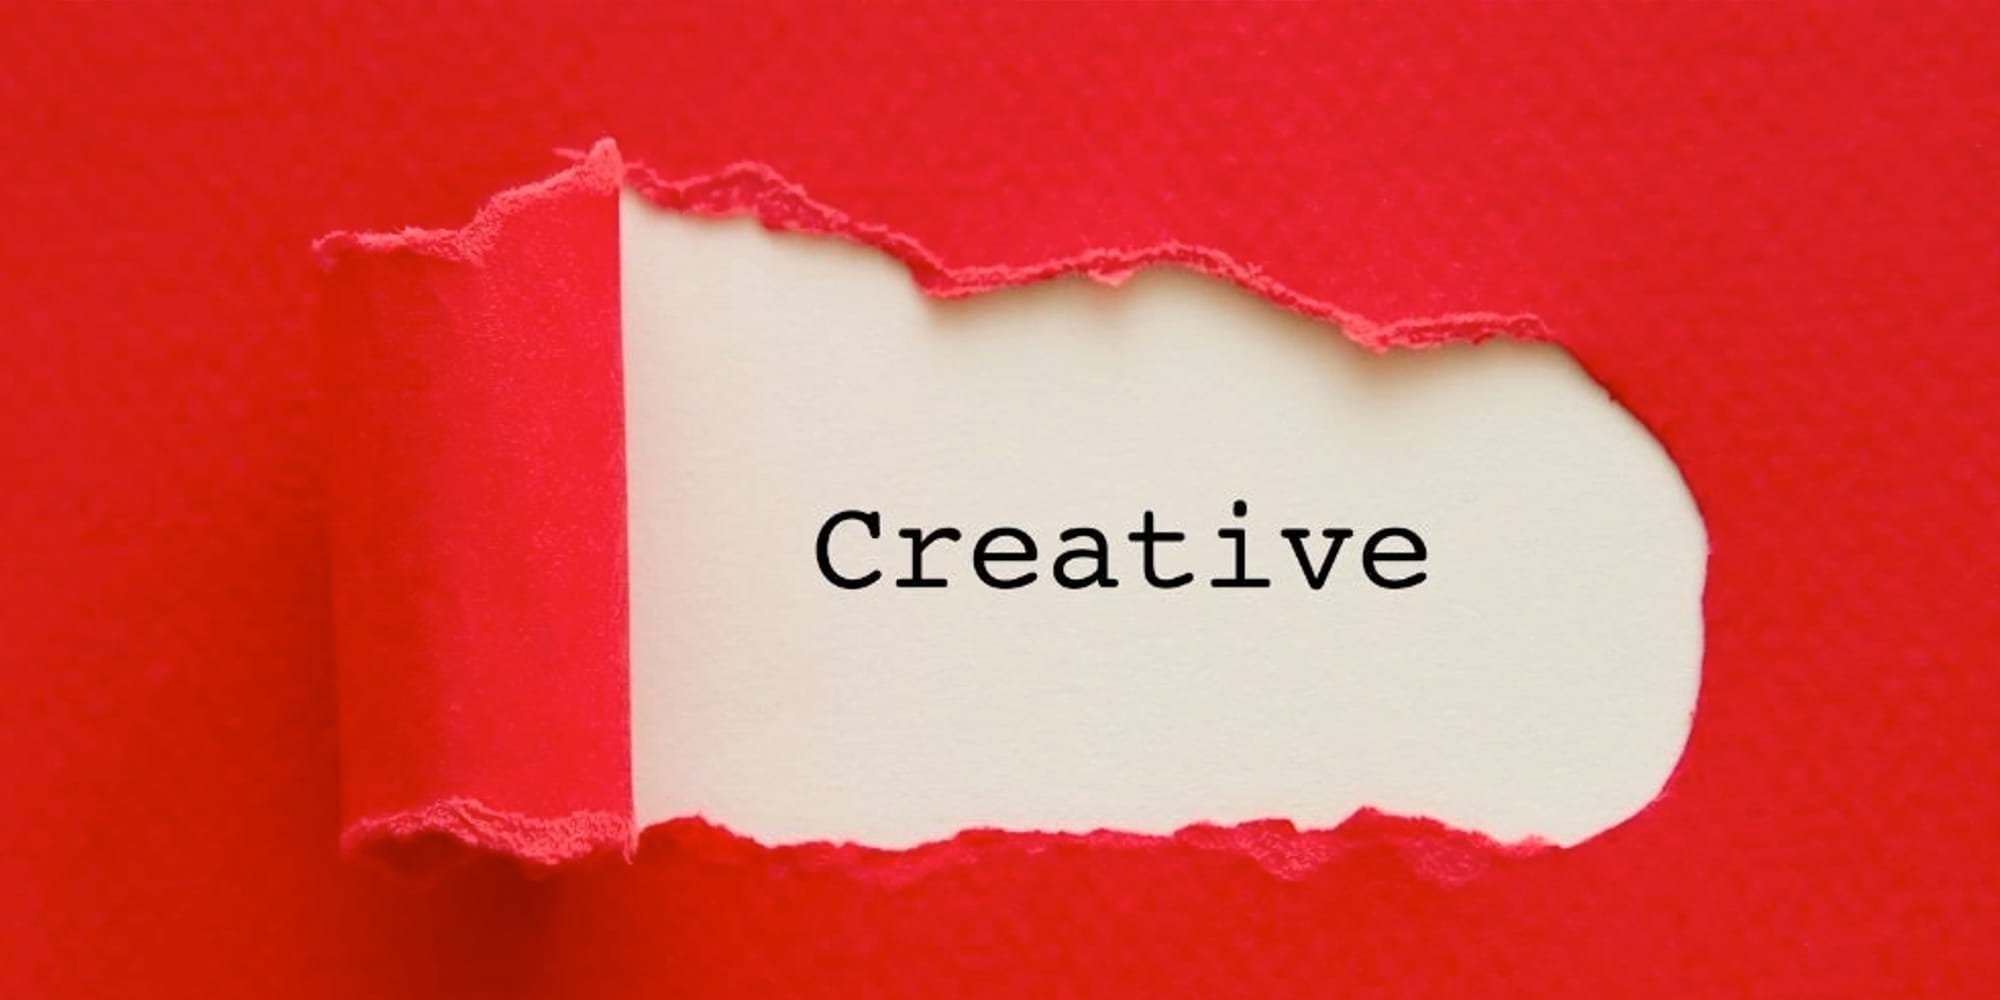 A red sheet of paper with a wrapped whole in the middle revealing the text 'creative' on white paper.